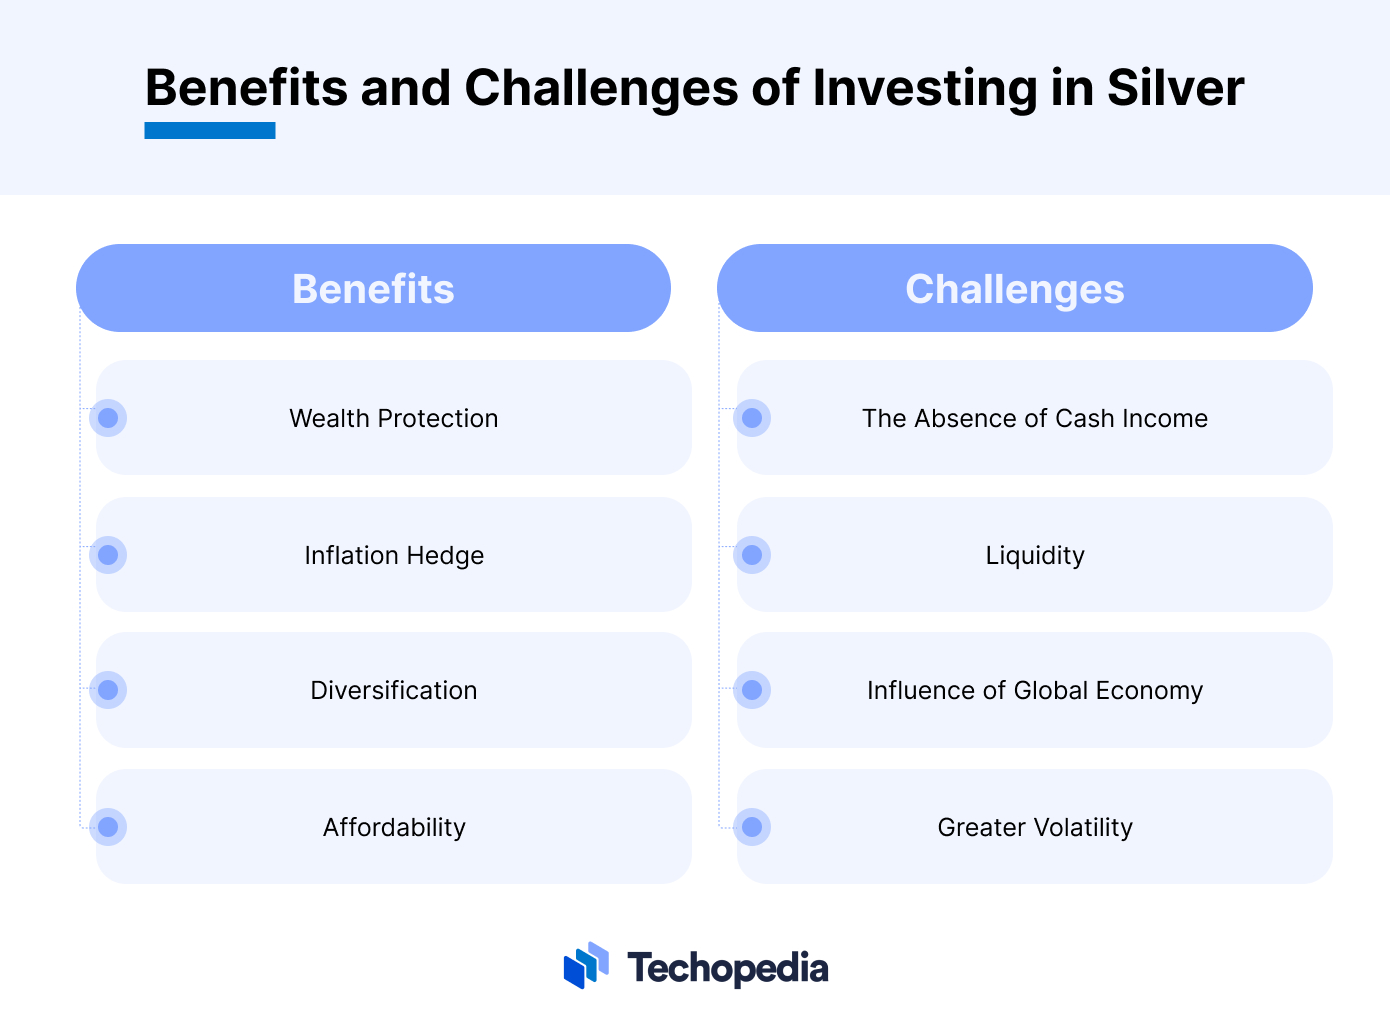 How To Buy Silver: 5 Ways To Invest